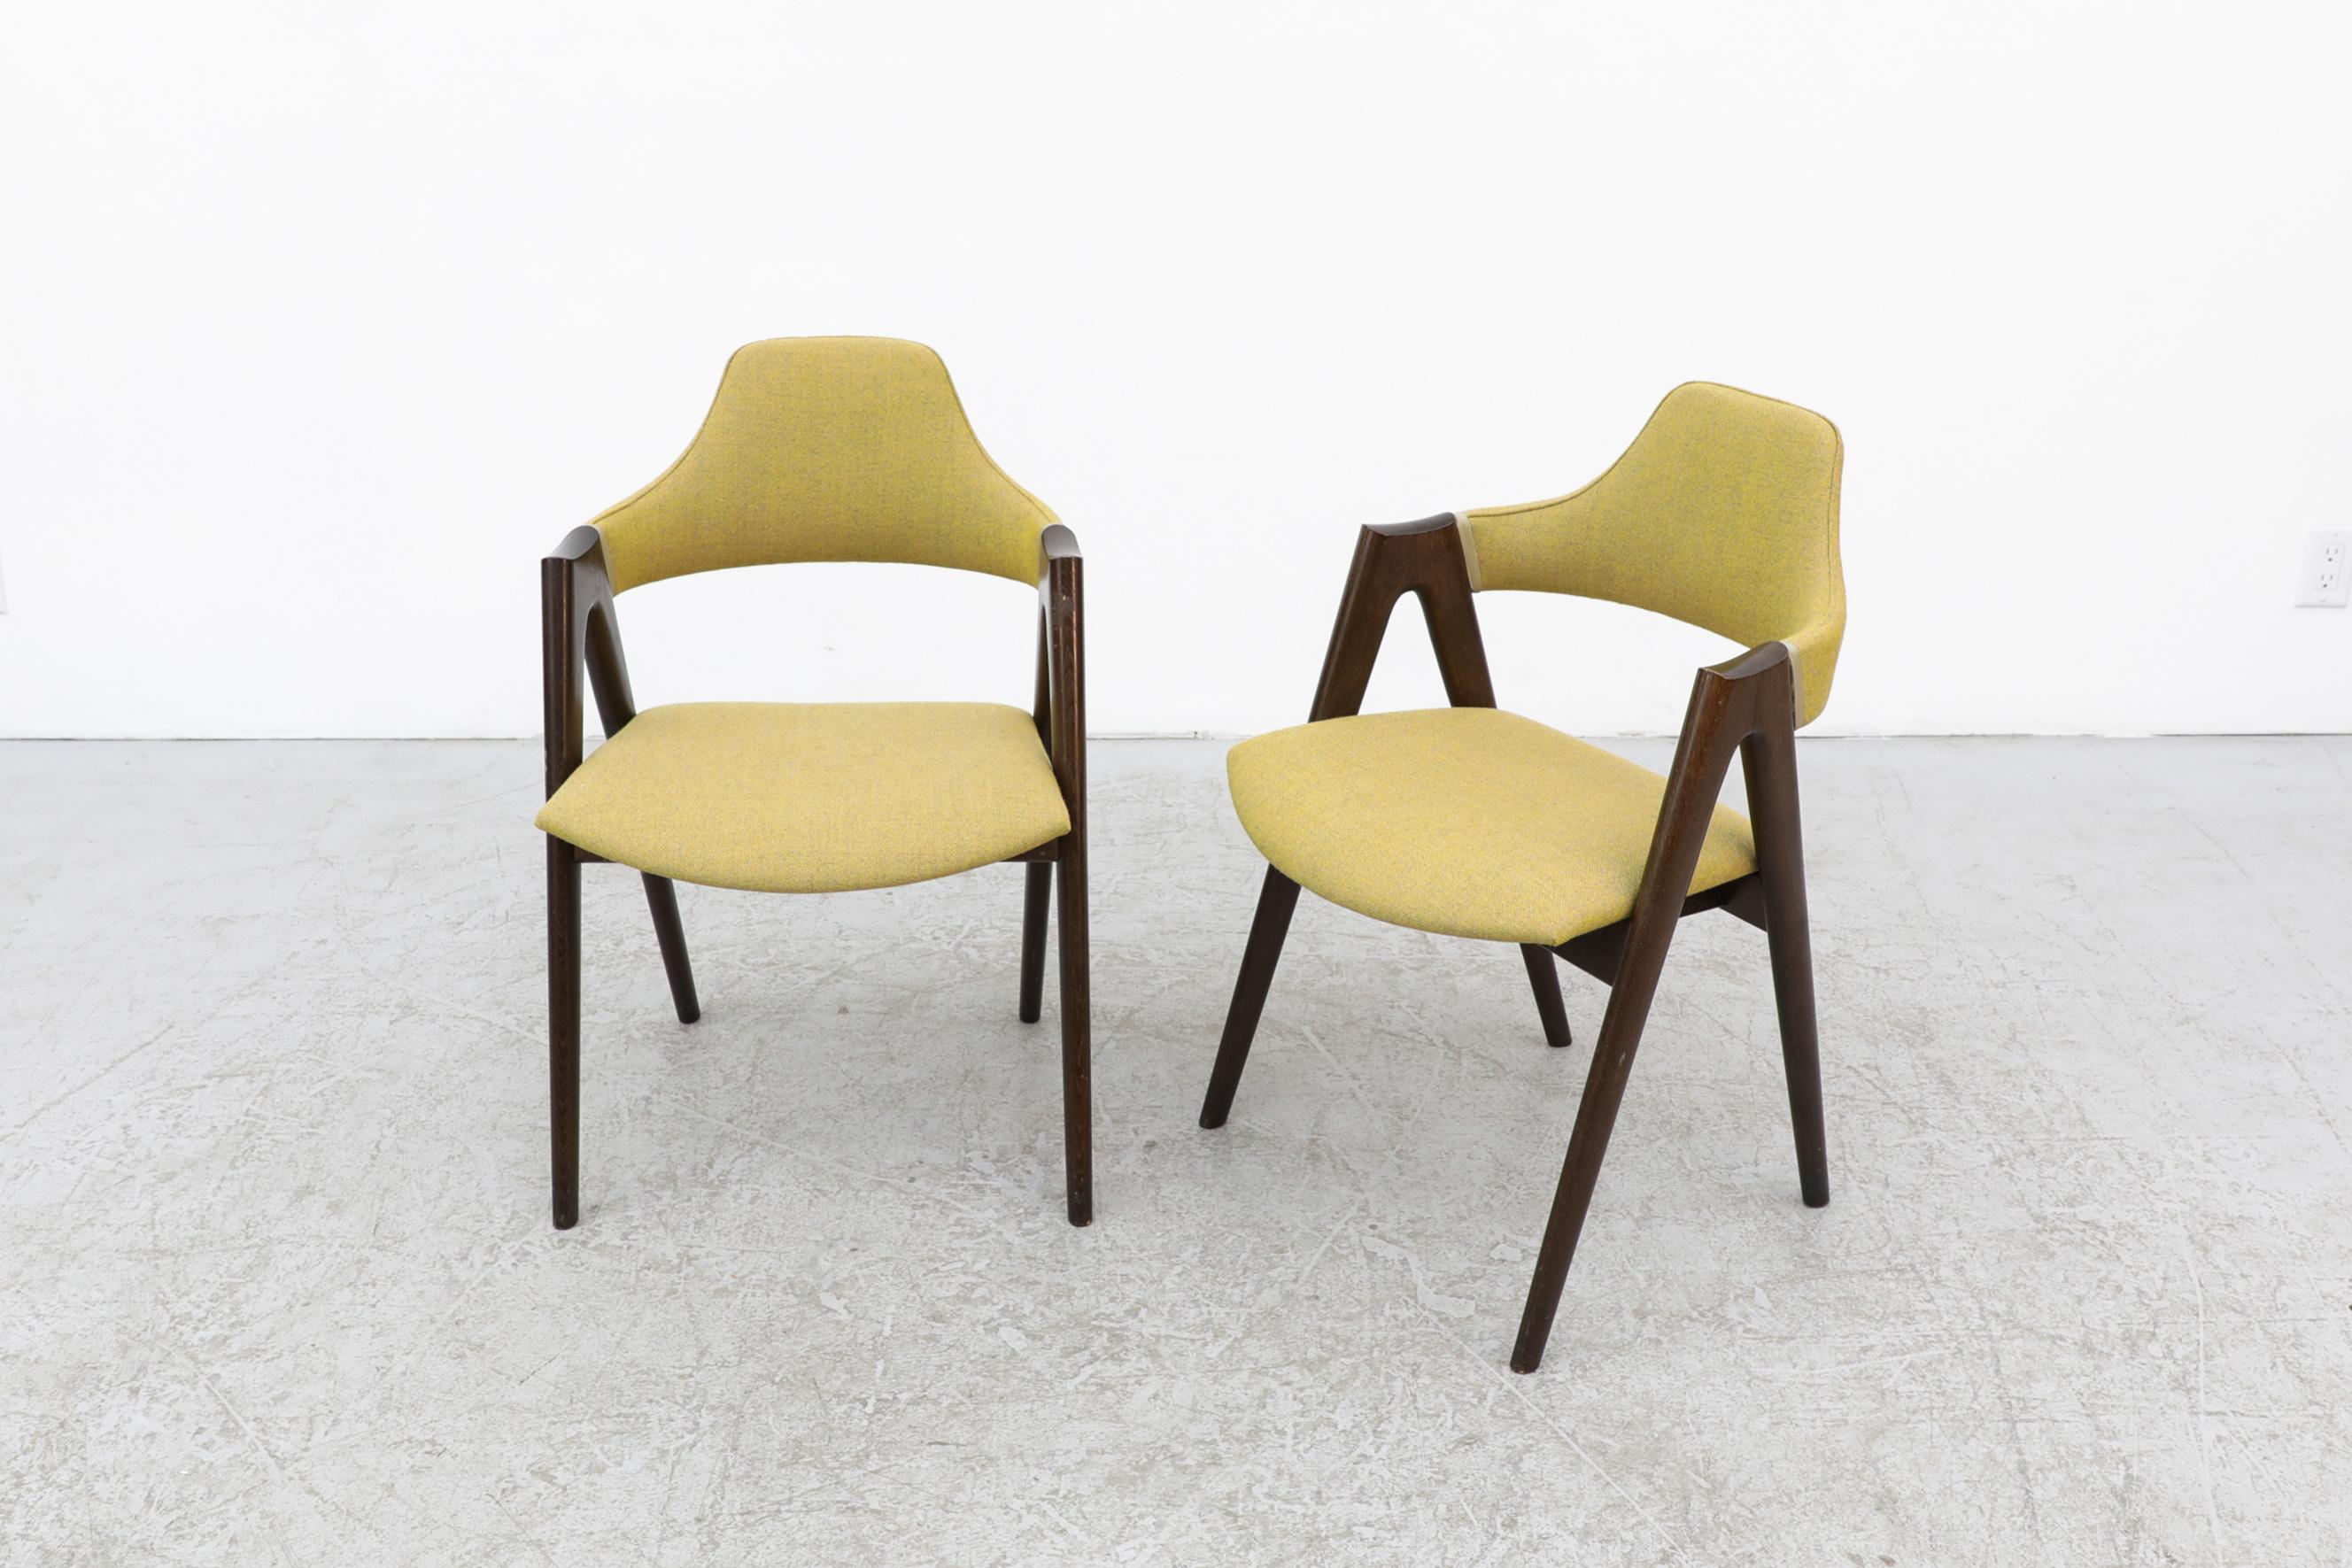 Upholstery Pair of Kai Kristiansen Dark Stained Wood Framed Compass Chairs in Kiwi Fabric